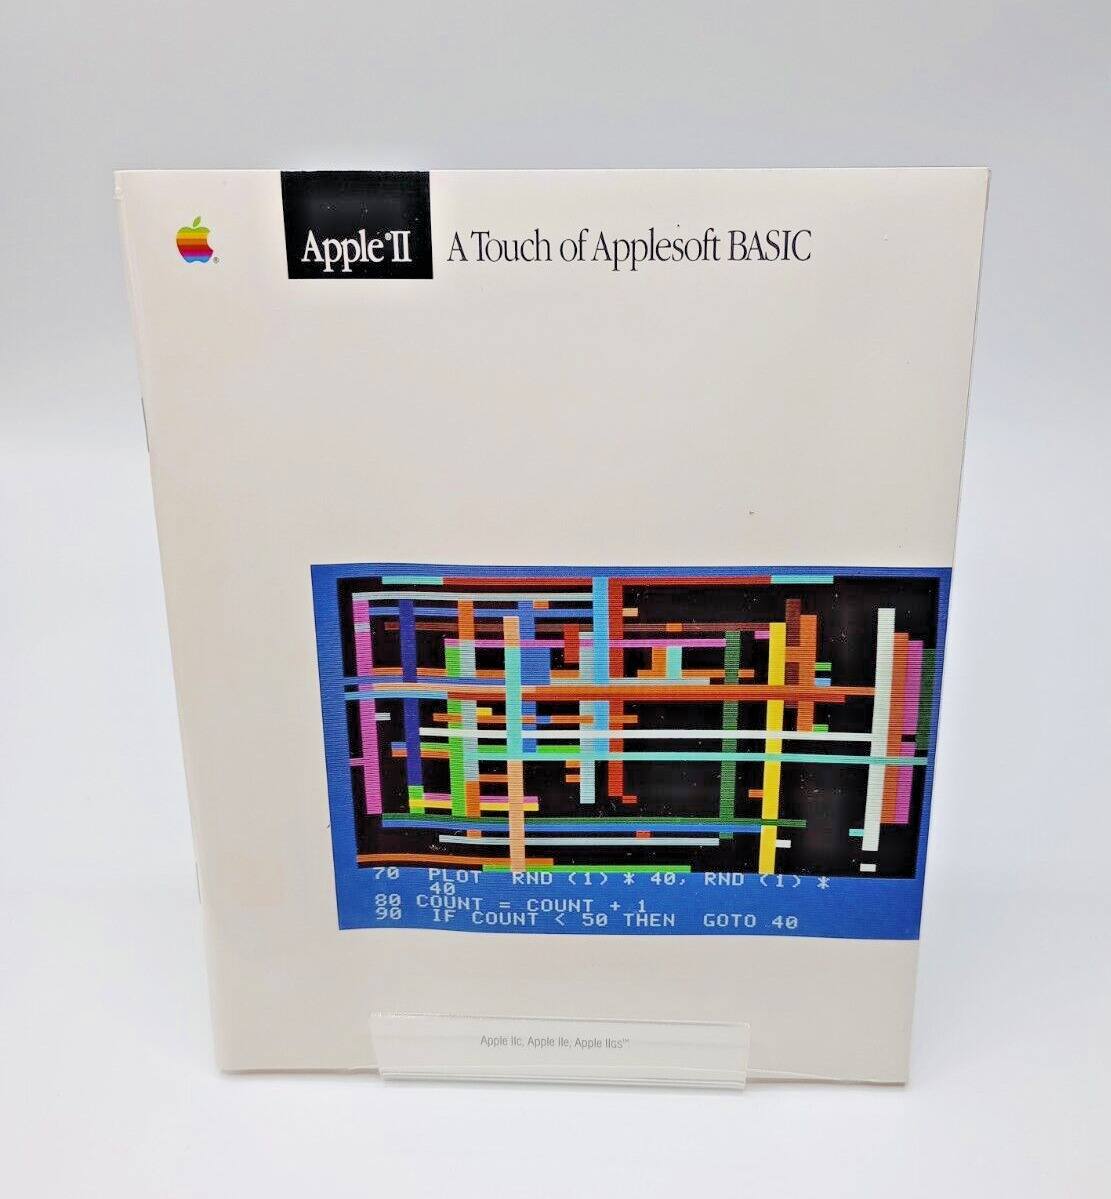 NEW/SEALED A Touch of Applesoft Basic (1986) - Manual for Apple II models